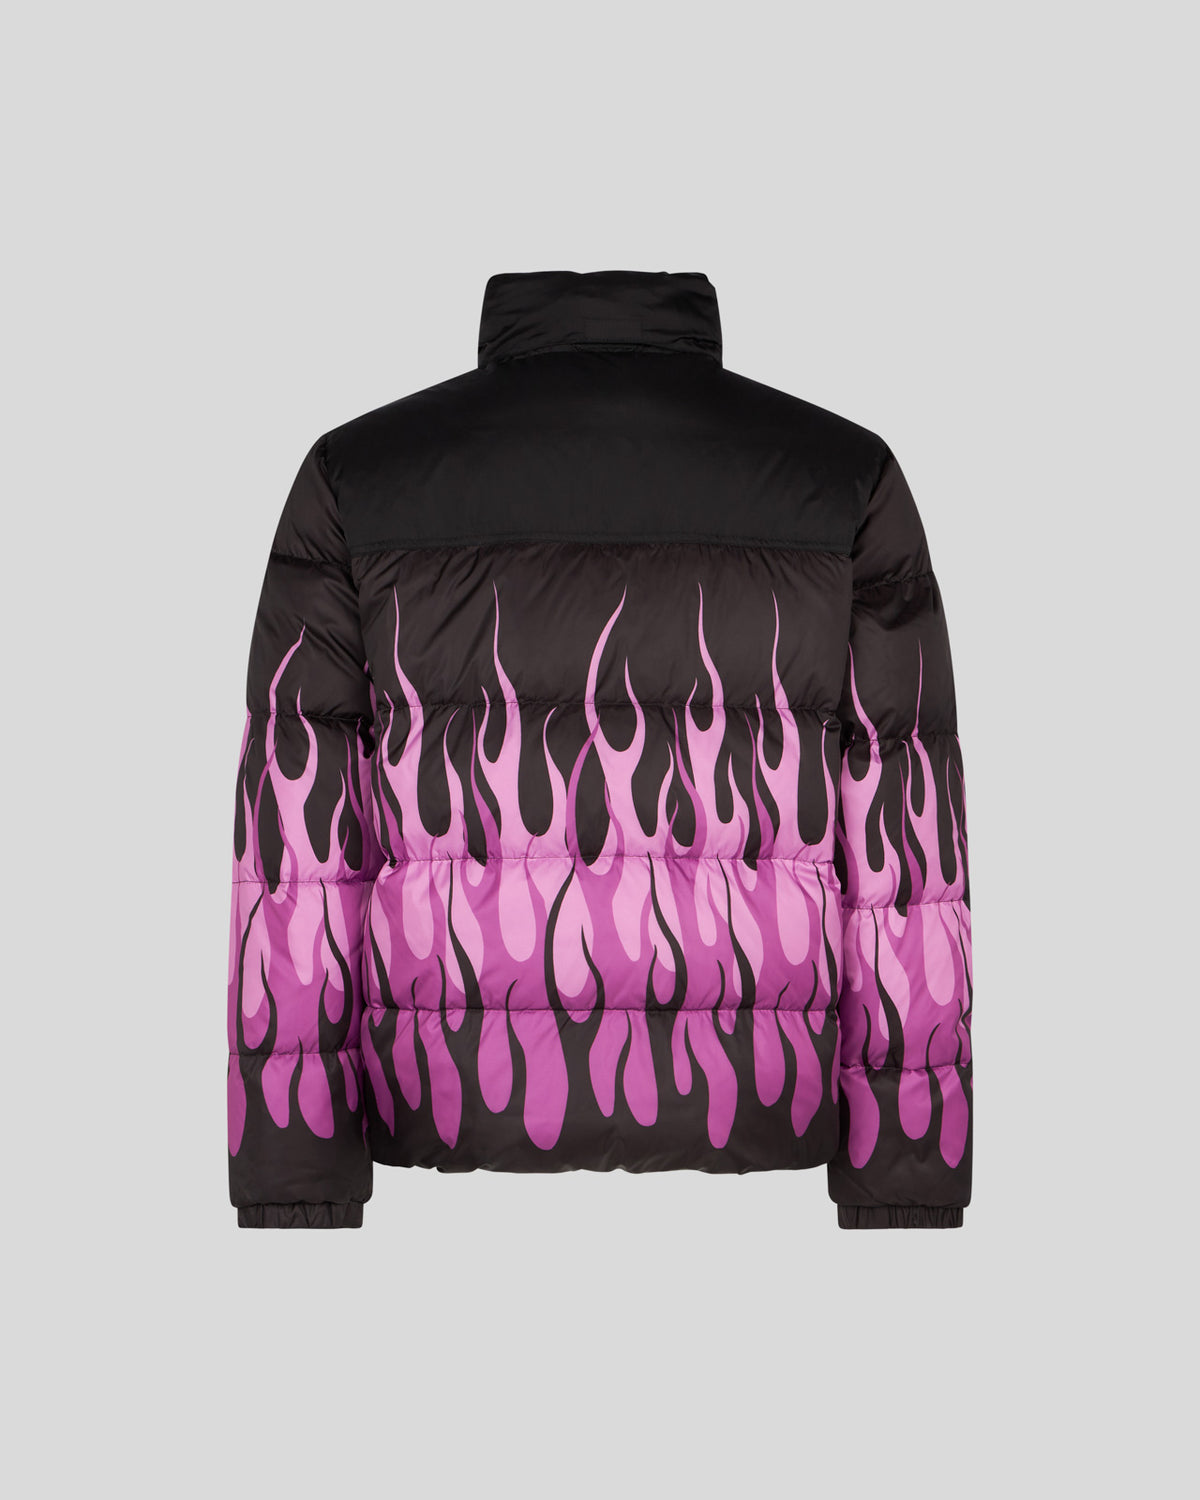 VISION OF SUPER BLACK PUFFY JACKET WITH PINK FLAMES